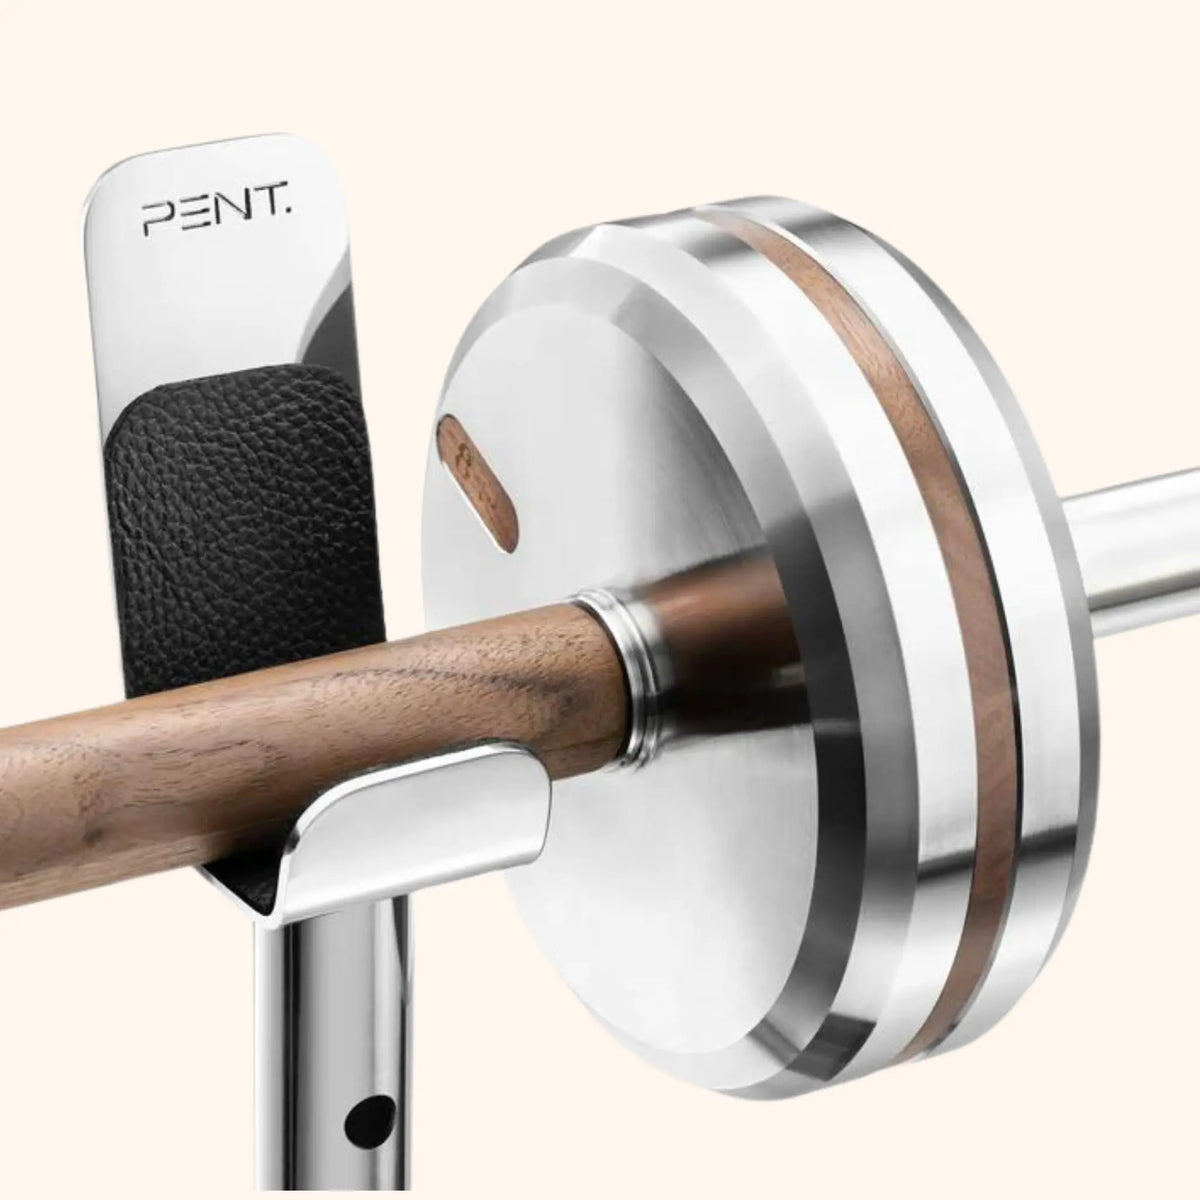 PENT | BYSTRA Bench Press Weight Rack PENT